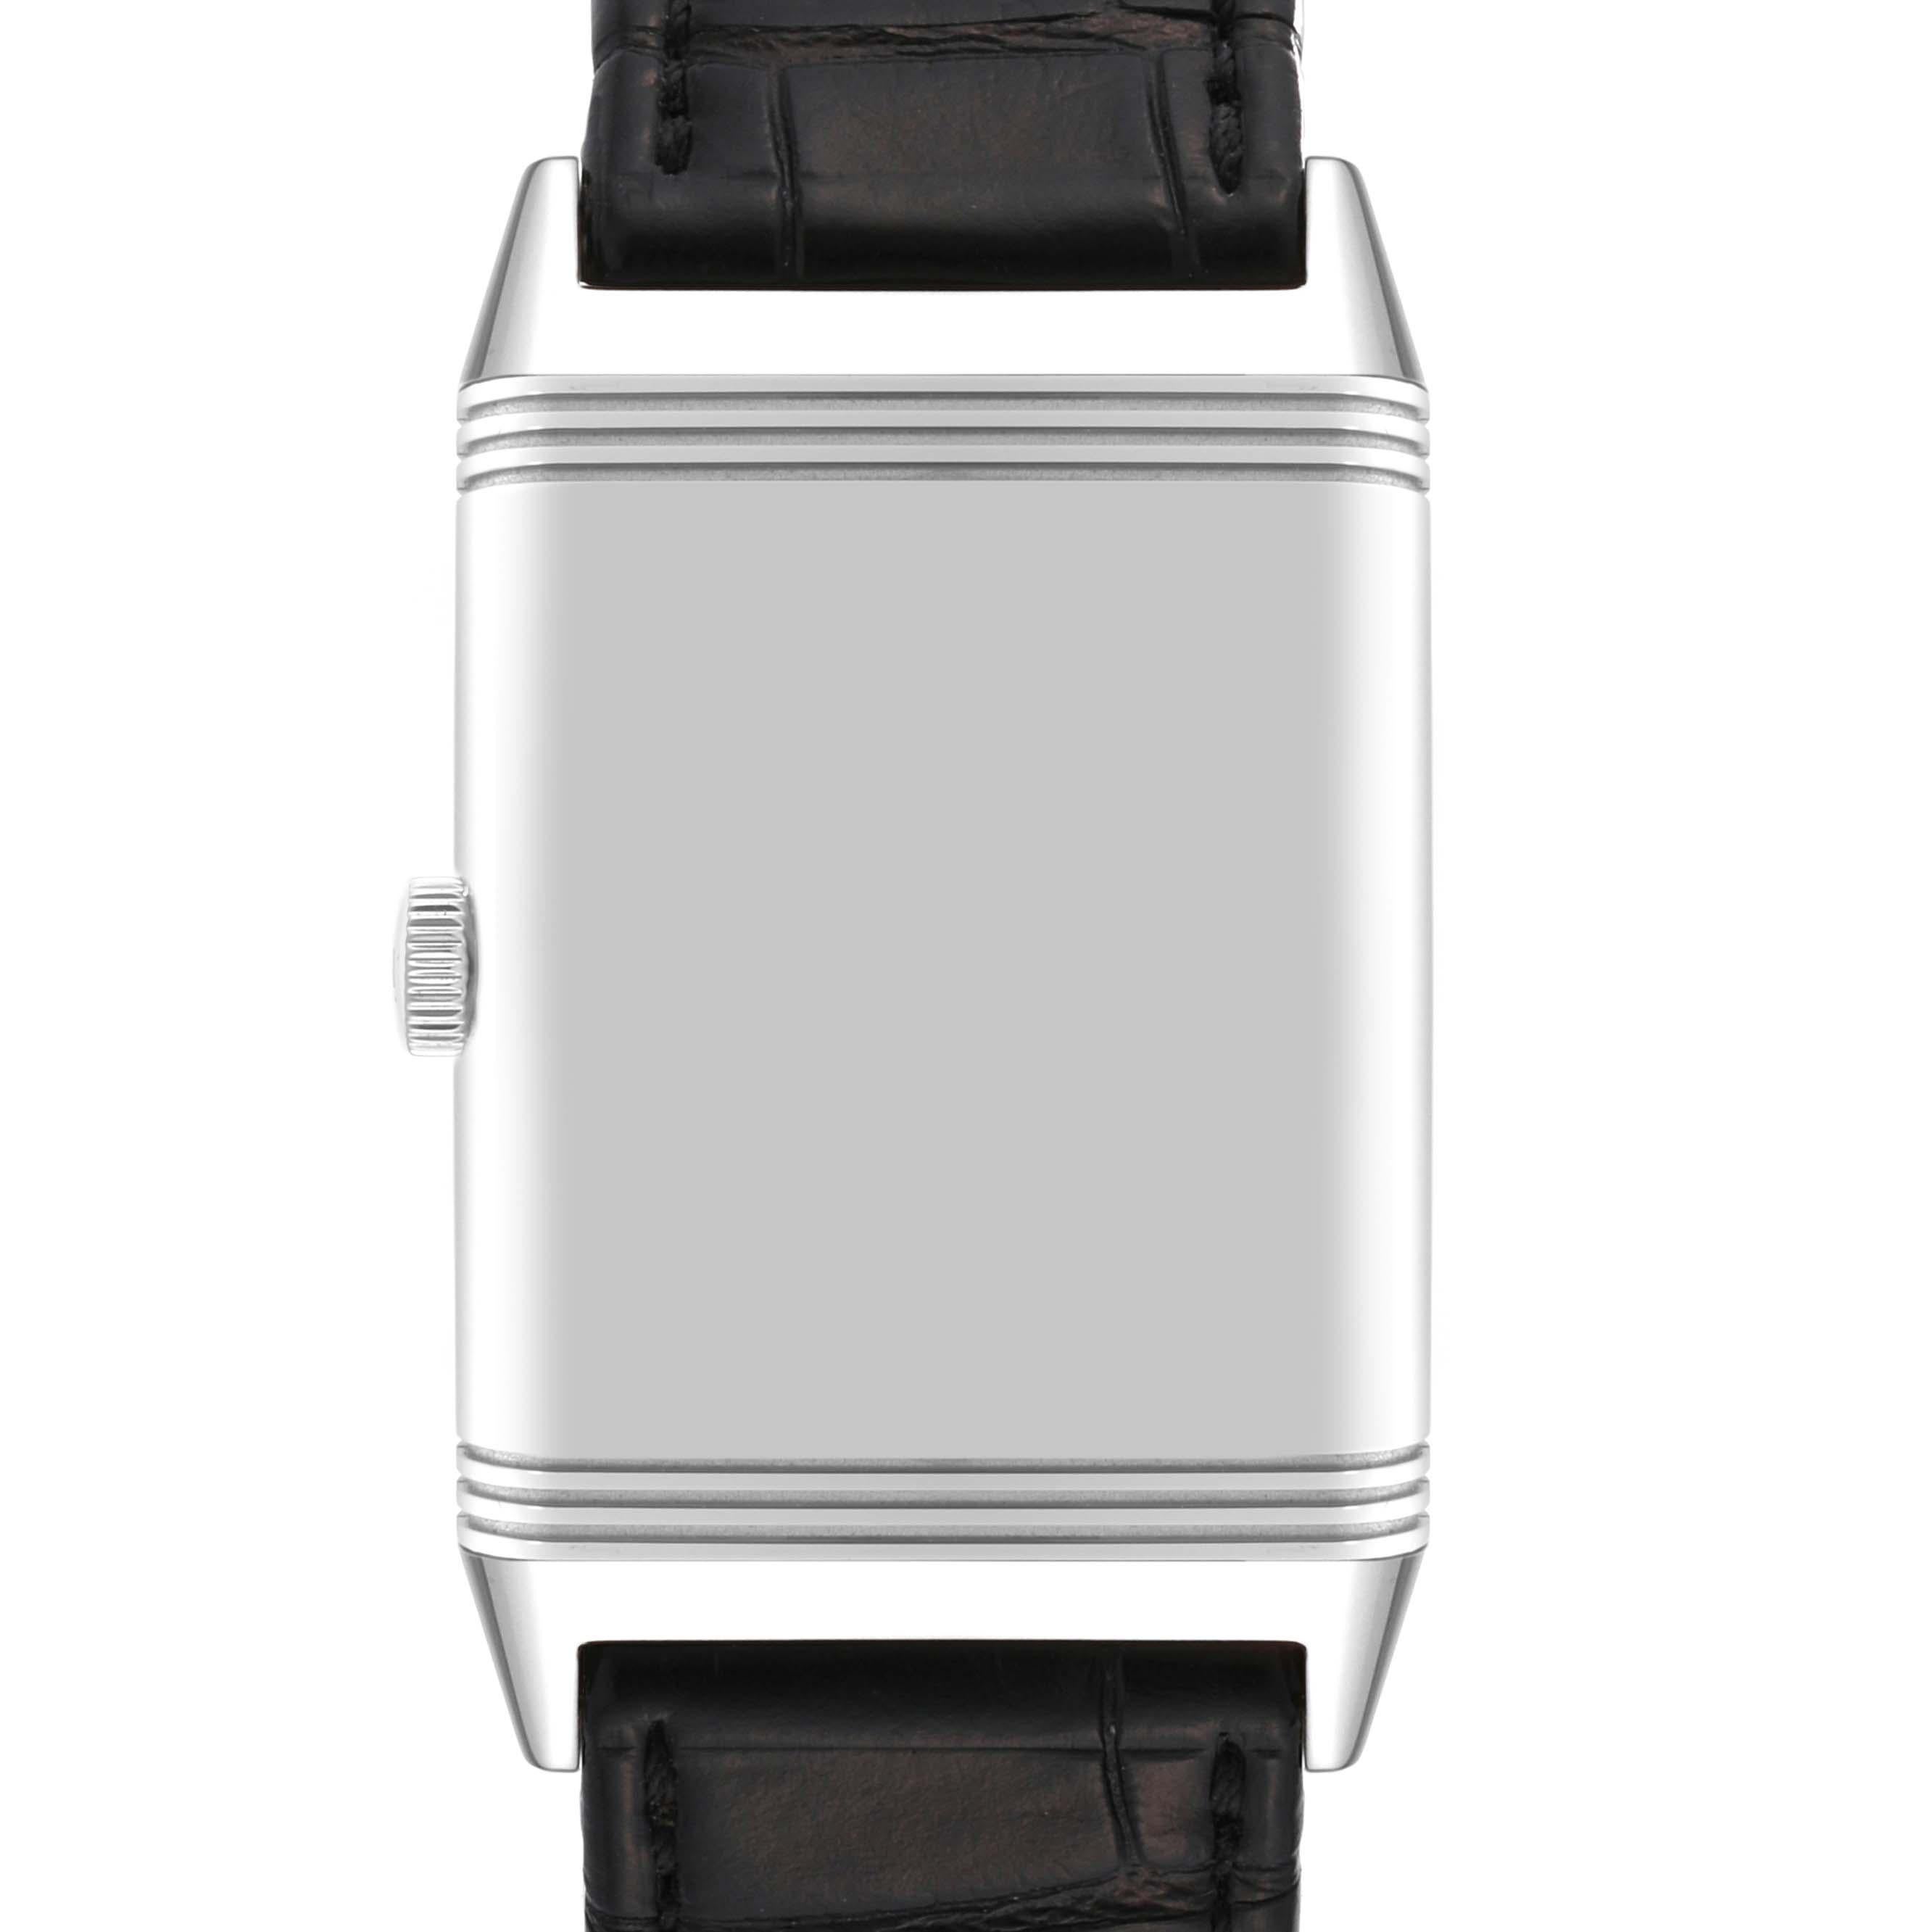 Jaeger LeCoultre Reverso Classic Medium Steel Mens Watch 213.8.62 Q2438520 Card. Manual winding movement. Stainless steel 25.5 x 35.5 mm rectangular case with reeded ends rotating within its back plate. Stainless steel bezel. Scratch resistant